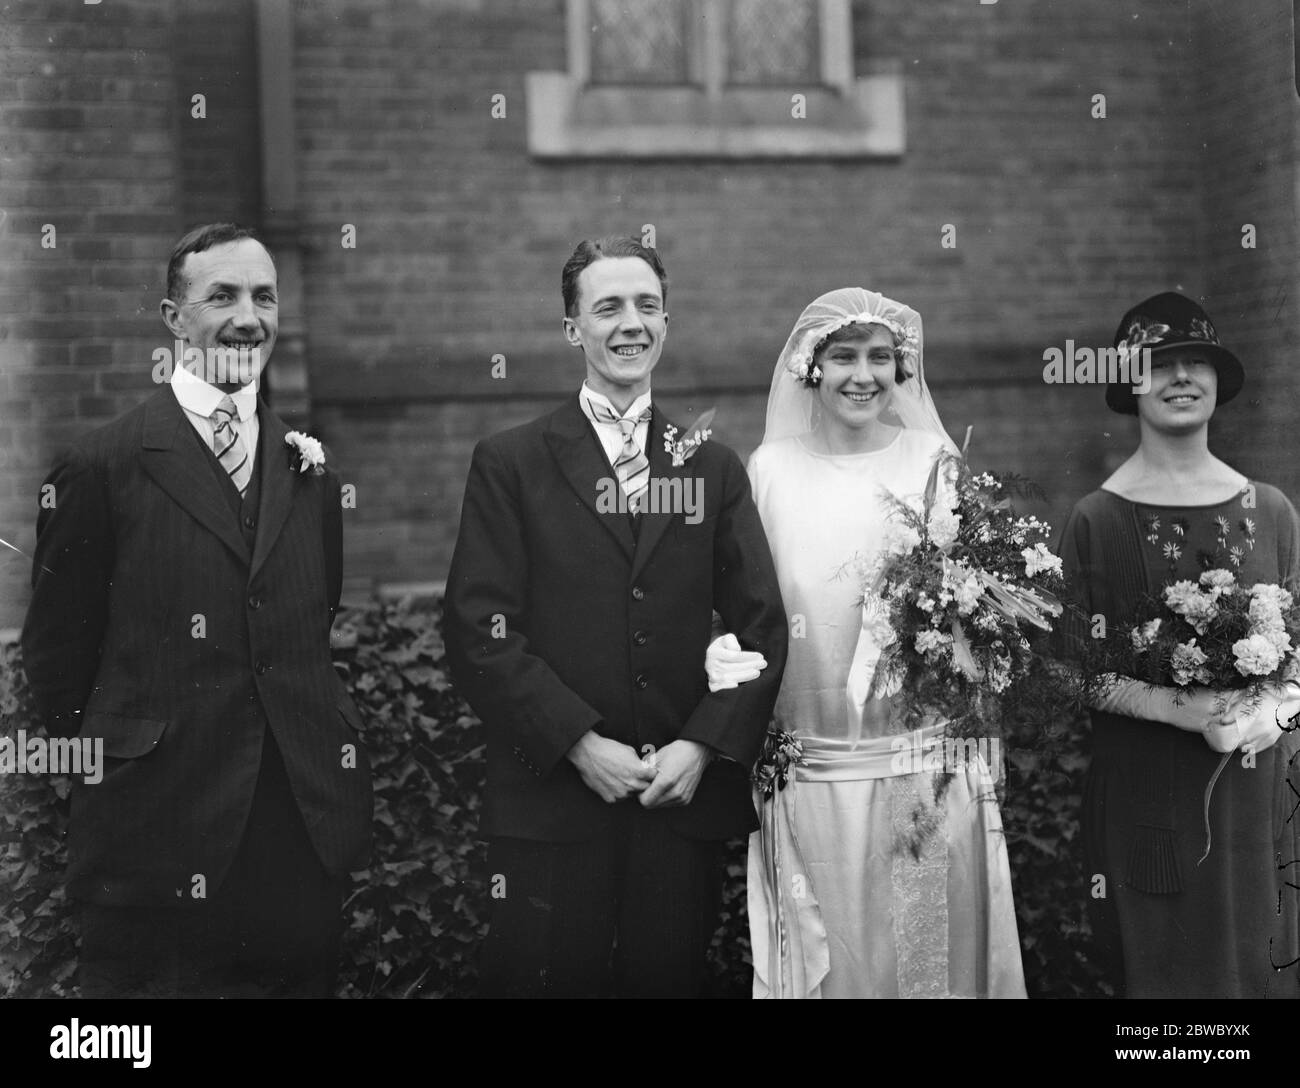 Cambridge Athlete ' s wedding Mr E D Mountain and Miss M Pickford were married at St James ' s Church , Streatham 24 December 1924 Stock Photo